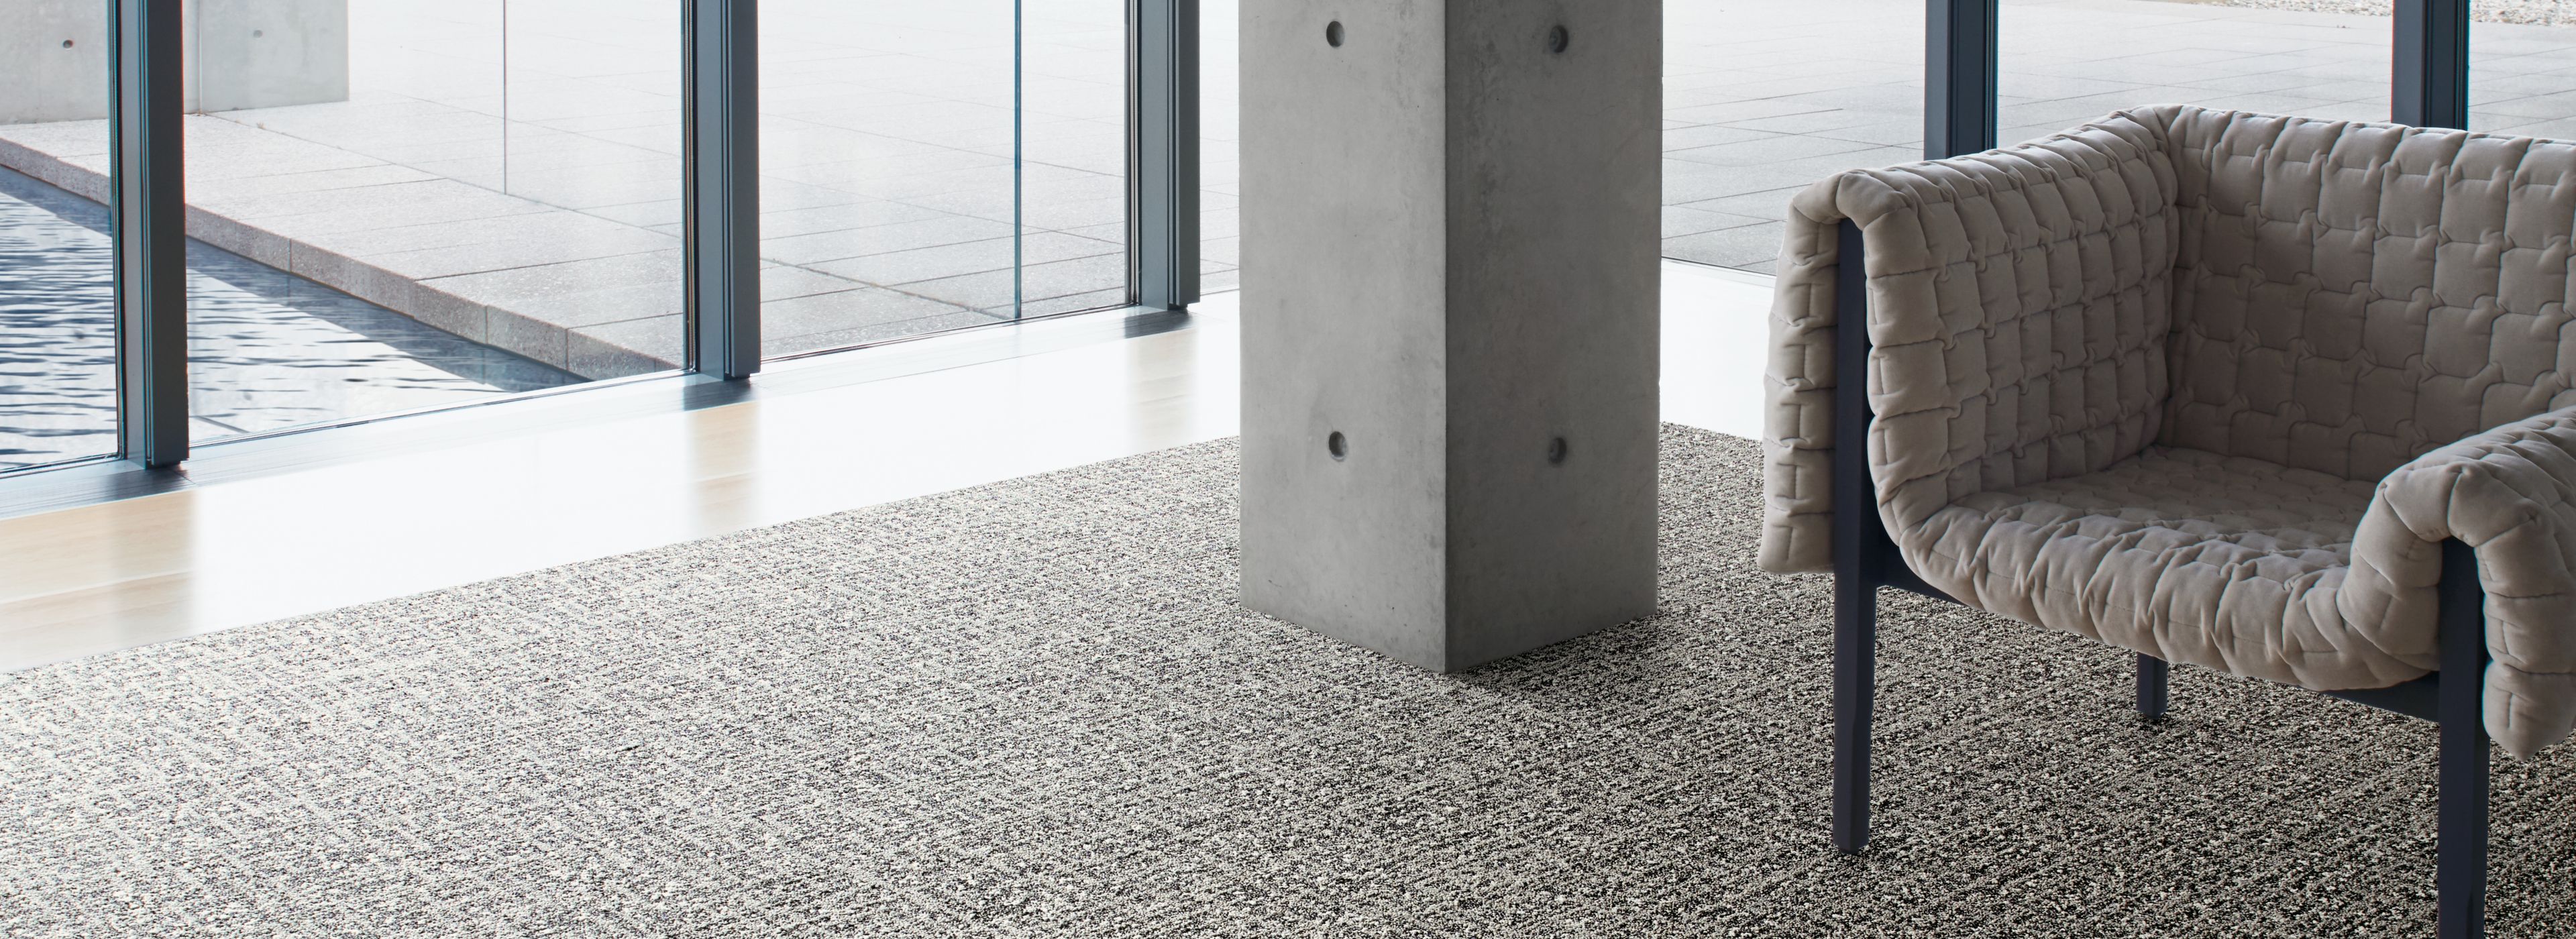 image Interface WW890 plank carpet tile and Textured Stones LVT in lobby area with chair numéro 1